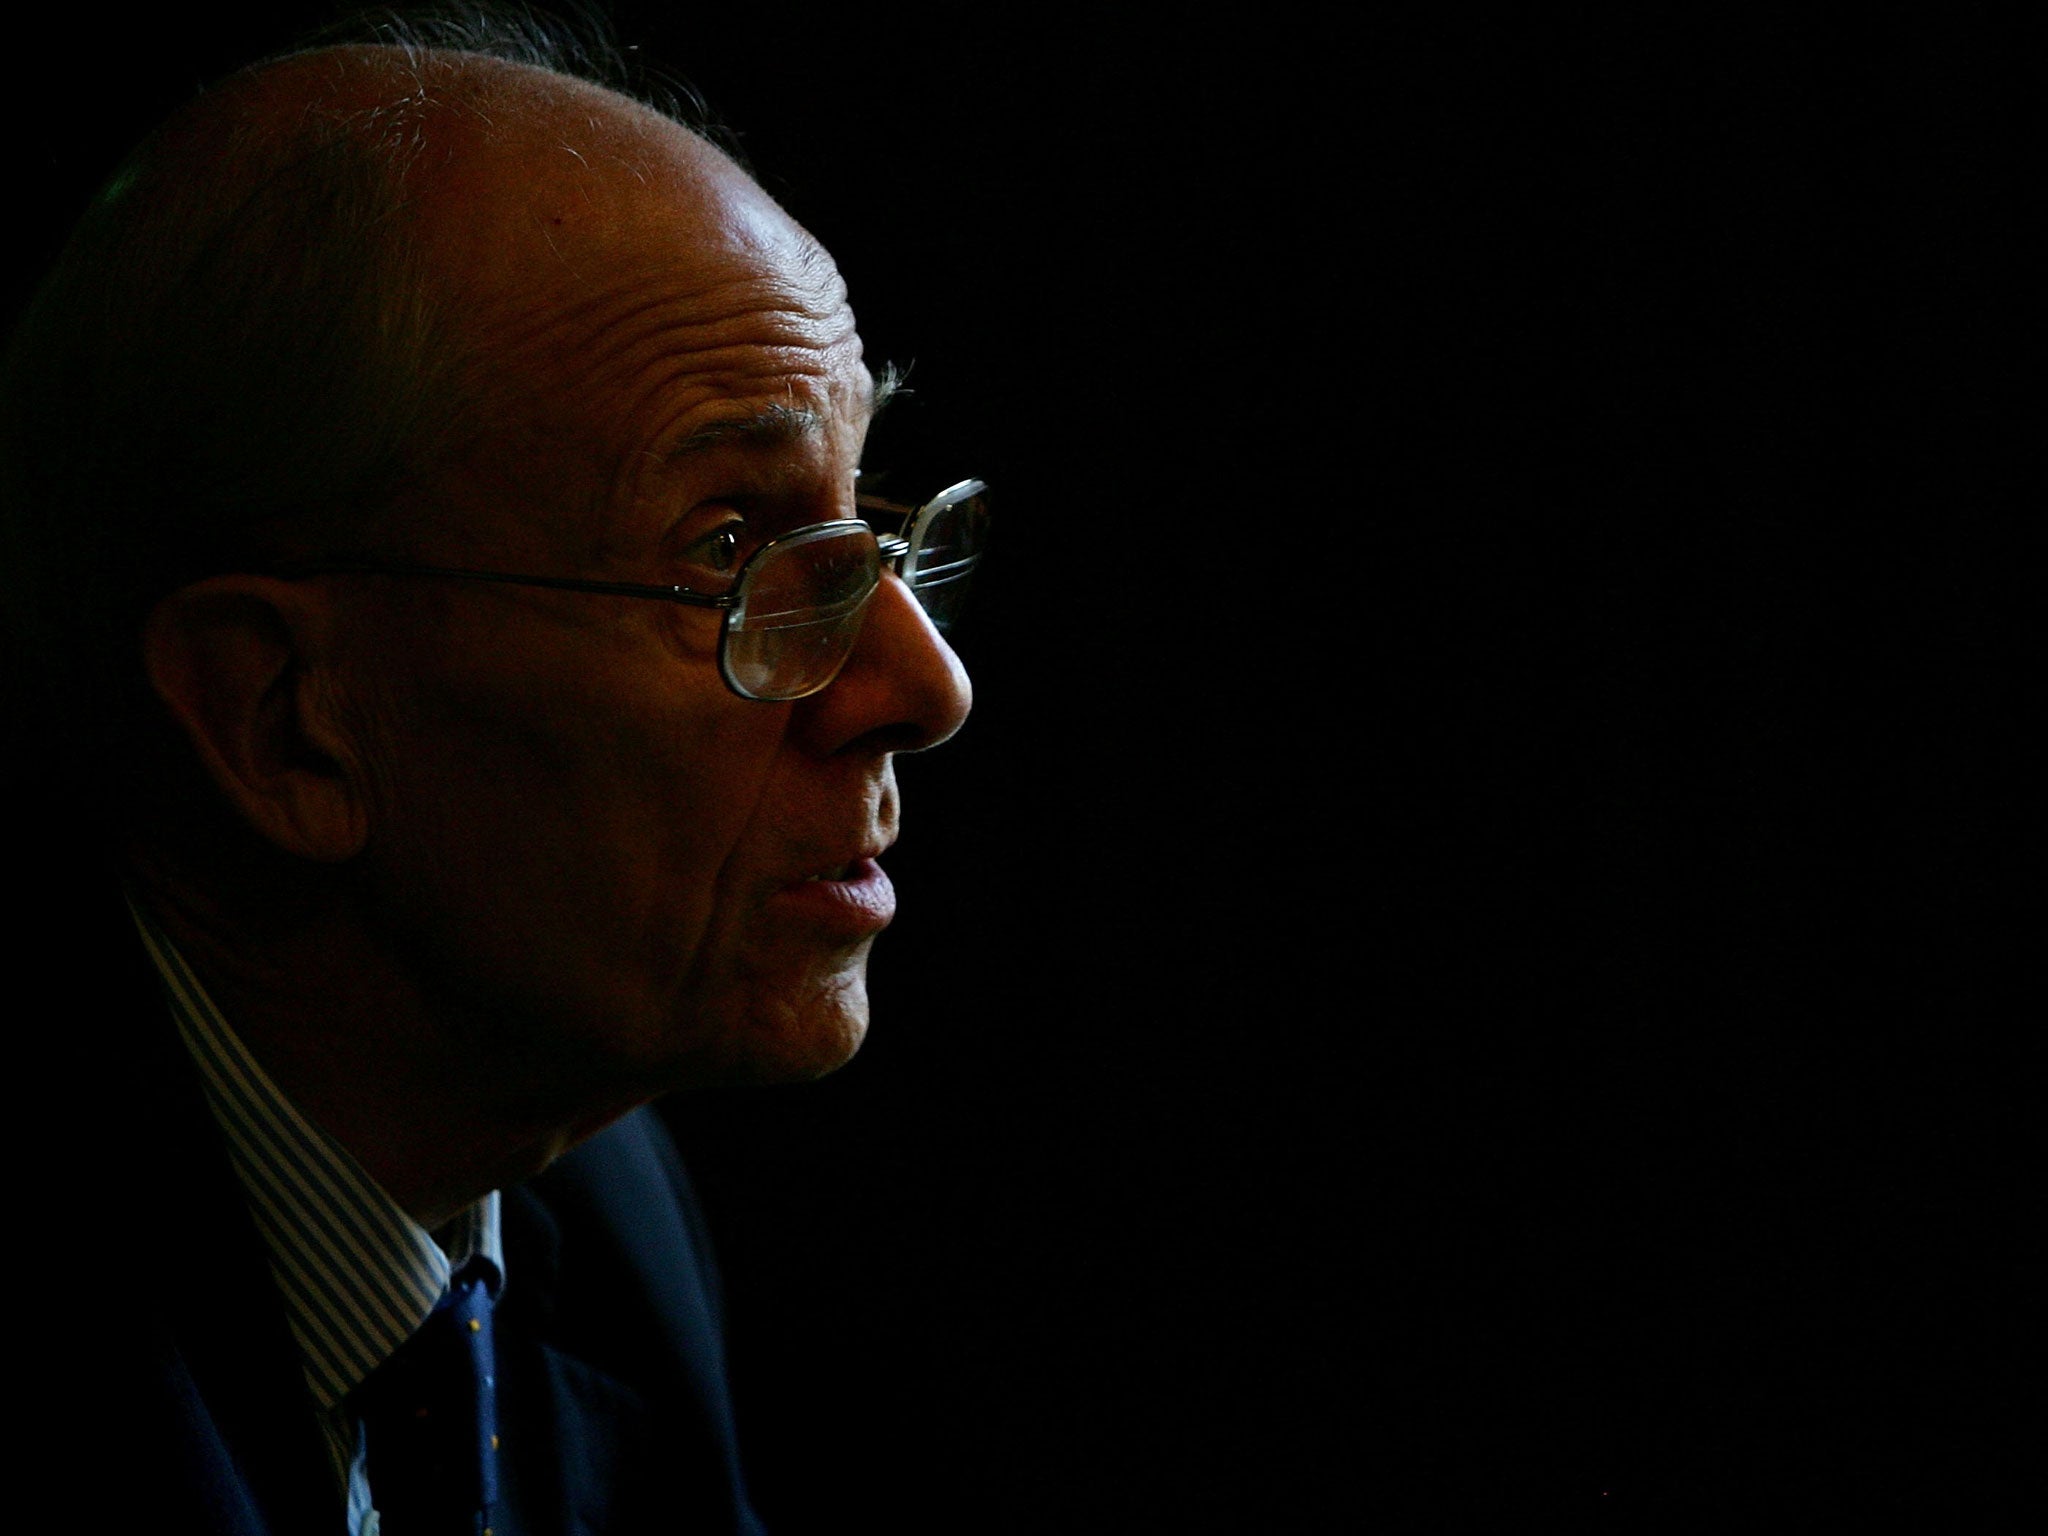 Lord Tebbit voiced his disgust at Mr McGuinness' invitation to Windsor Castle by saying he hoped the former IRA commander would be shot in the back by a member of the Real IRA